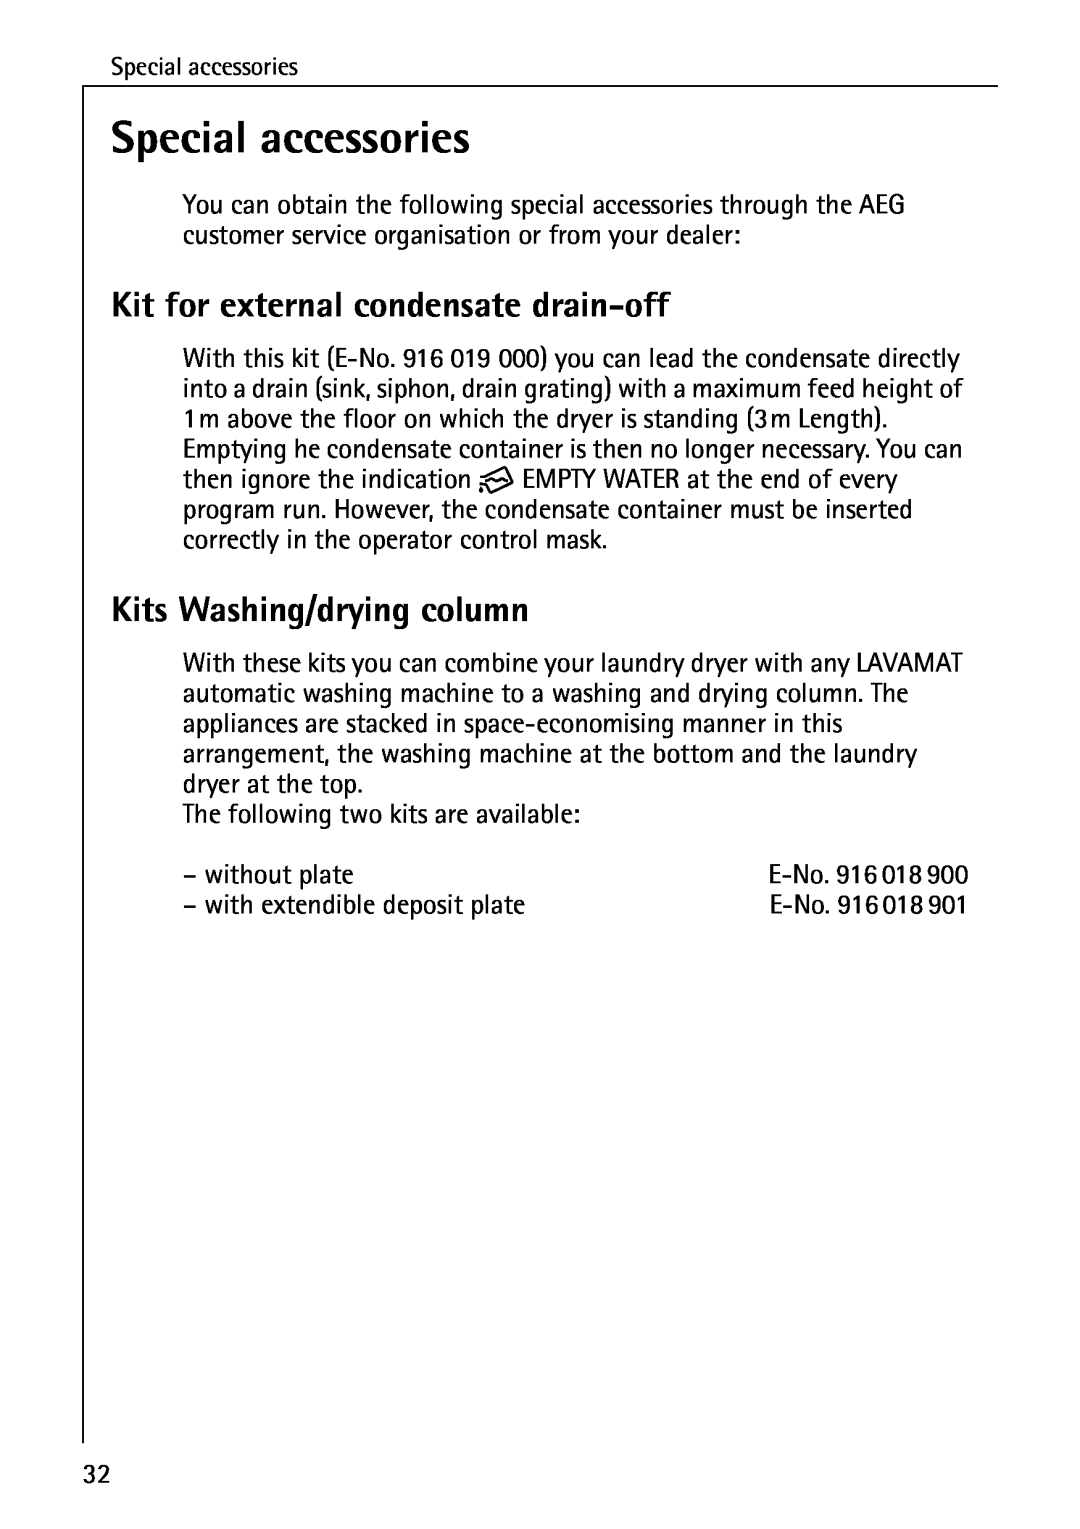 AEG 56609 operating instructions Special accessories, Kit for external condensate drain-off, Kits Washing/drying column 